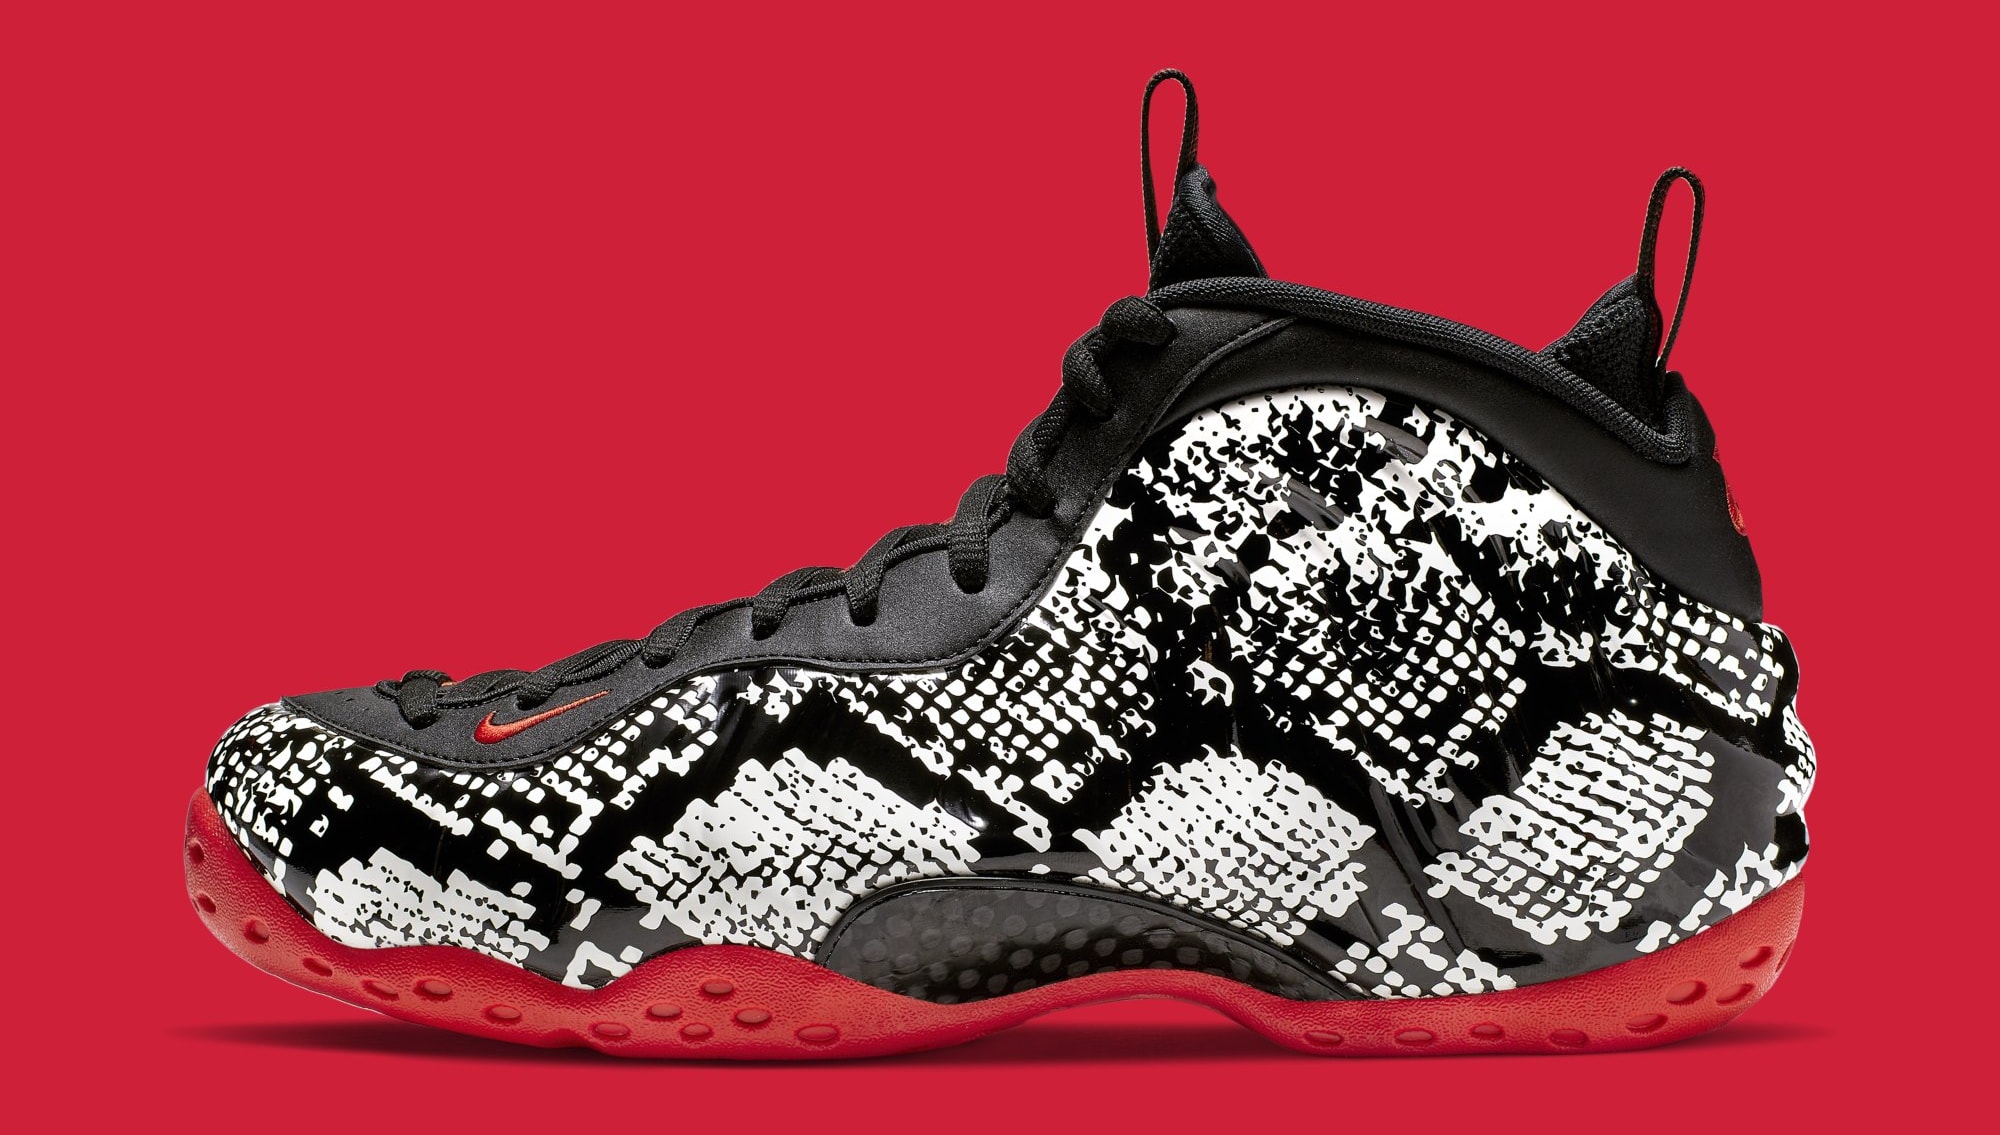 Nike Air Foamposite One 'Snakeskin' 314996-101 (Lateral)